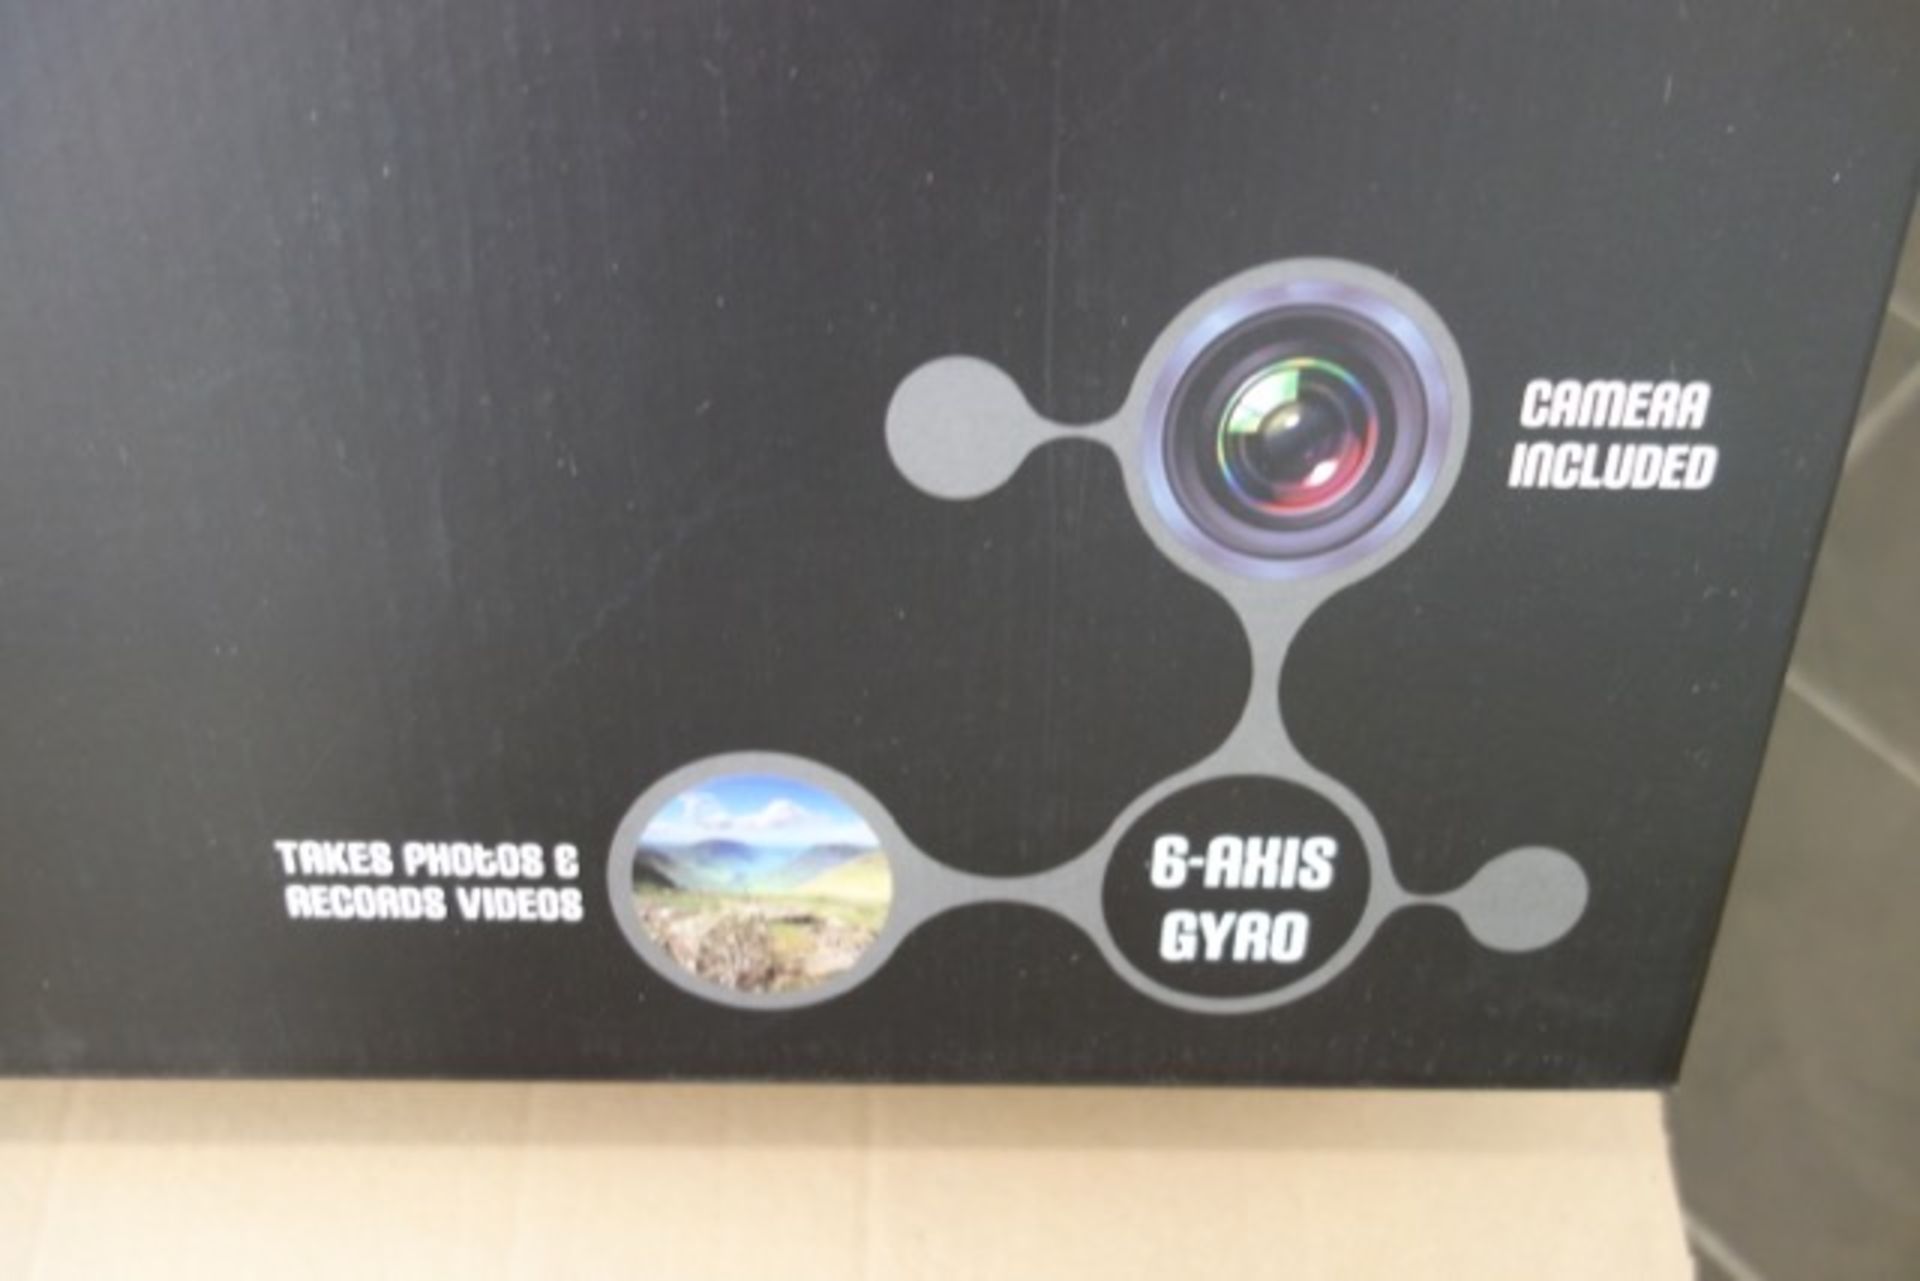 1 x Brand New Global Gizmos 2.4GHZ Remote Control Drone. Takes images & recordes videos, 6 axis - Image 2 of 4